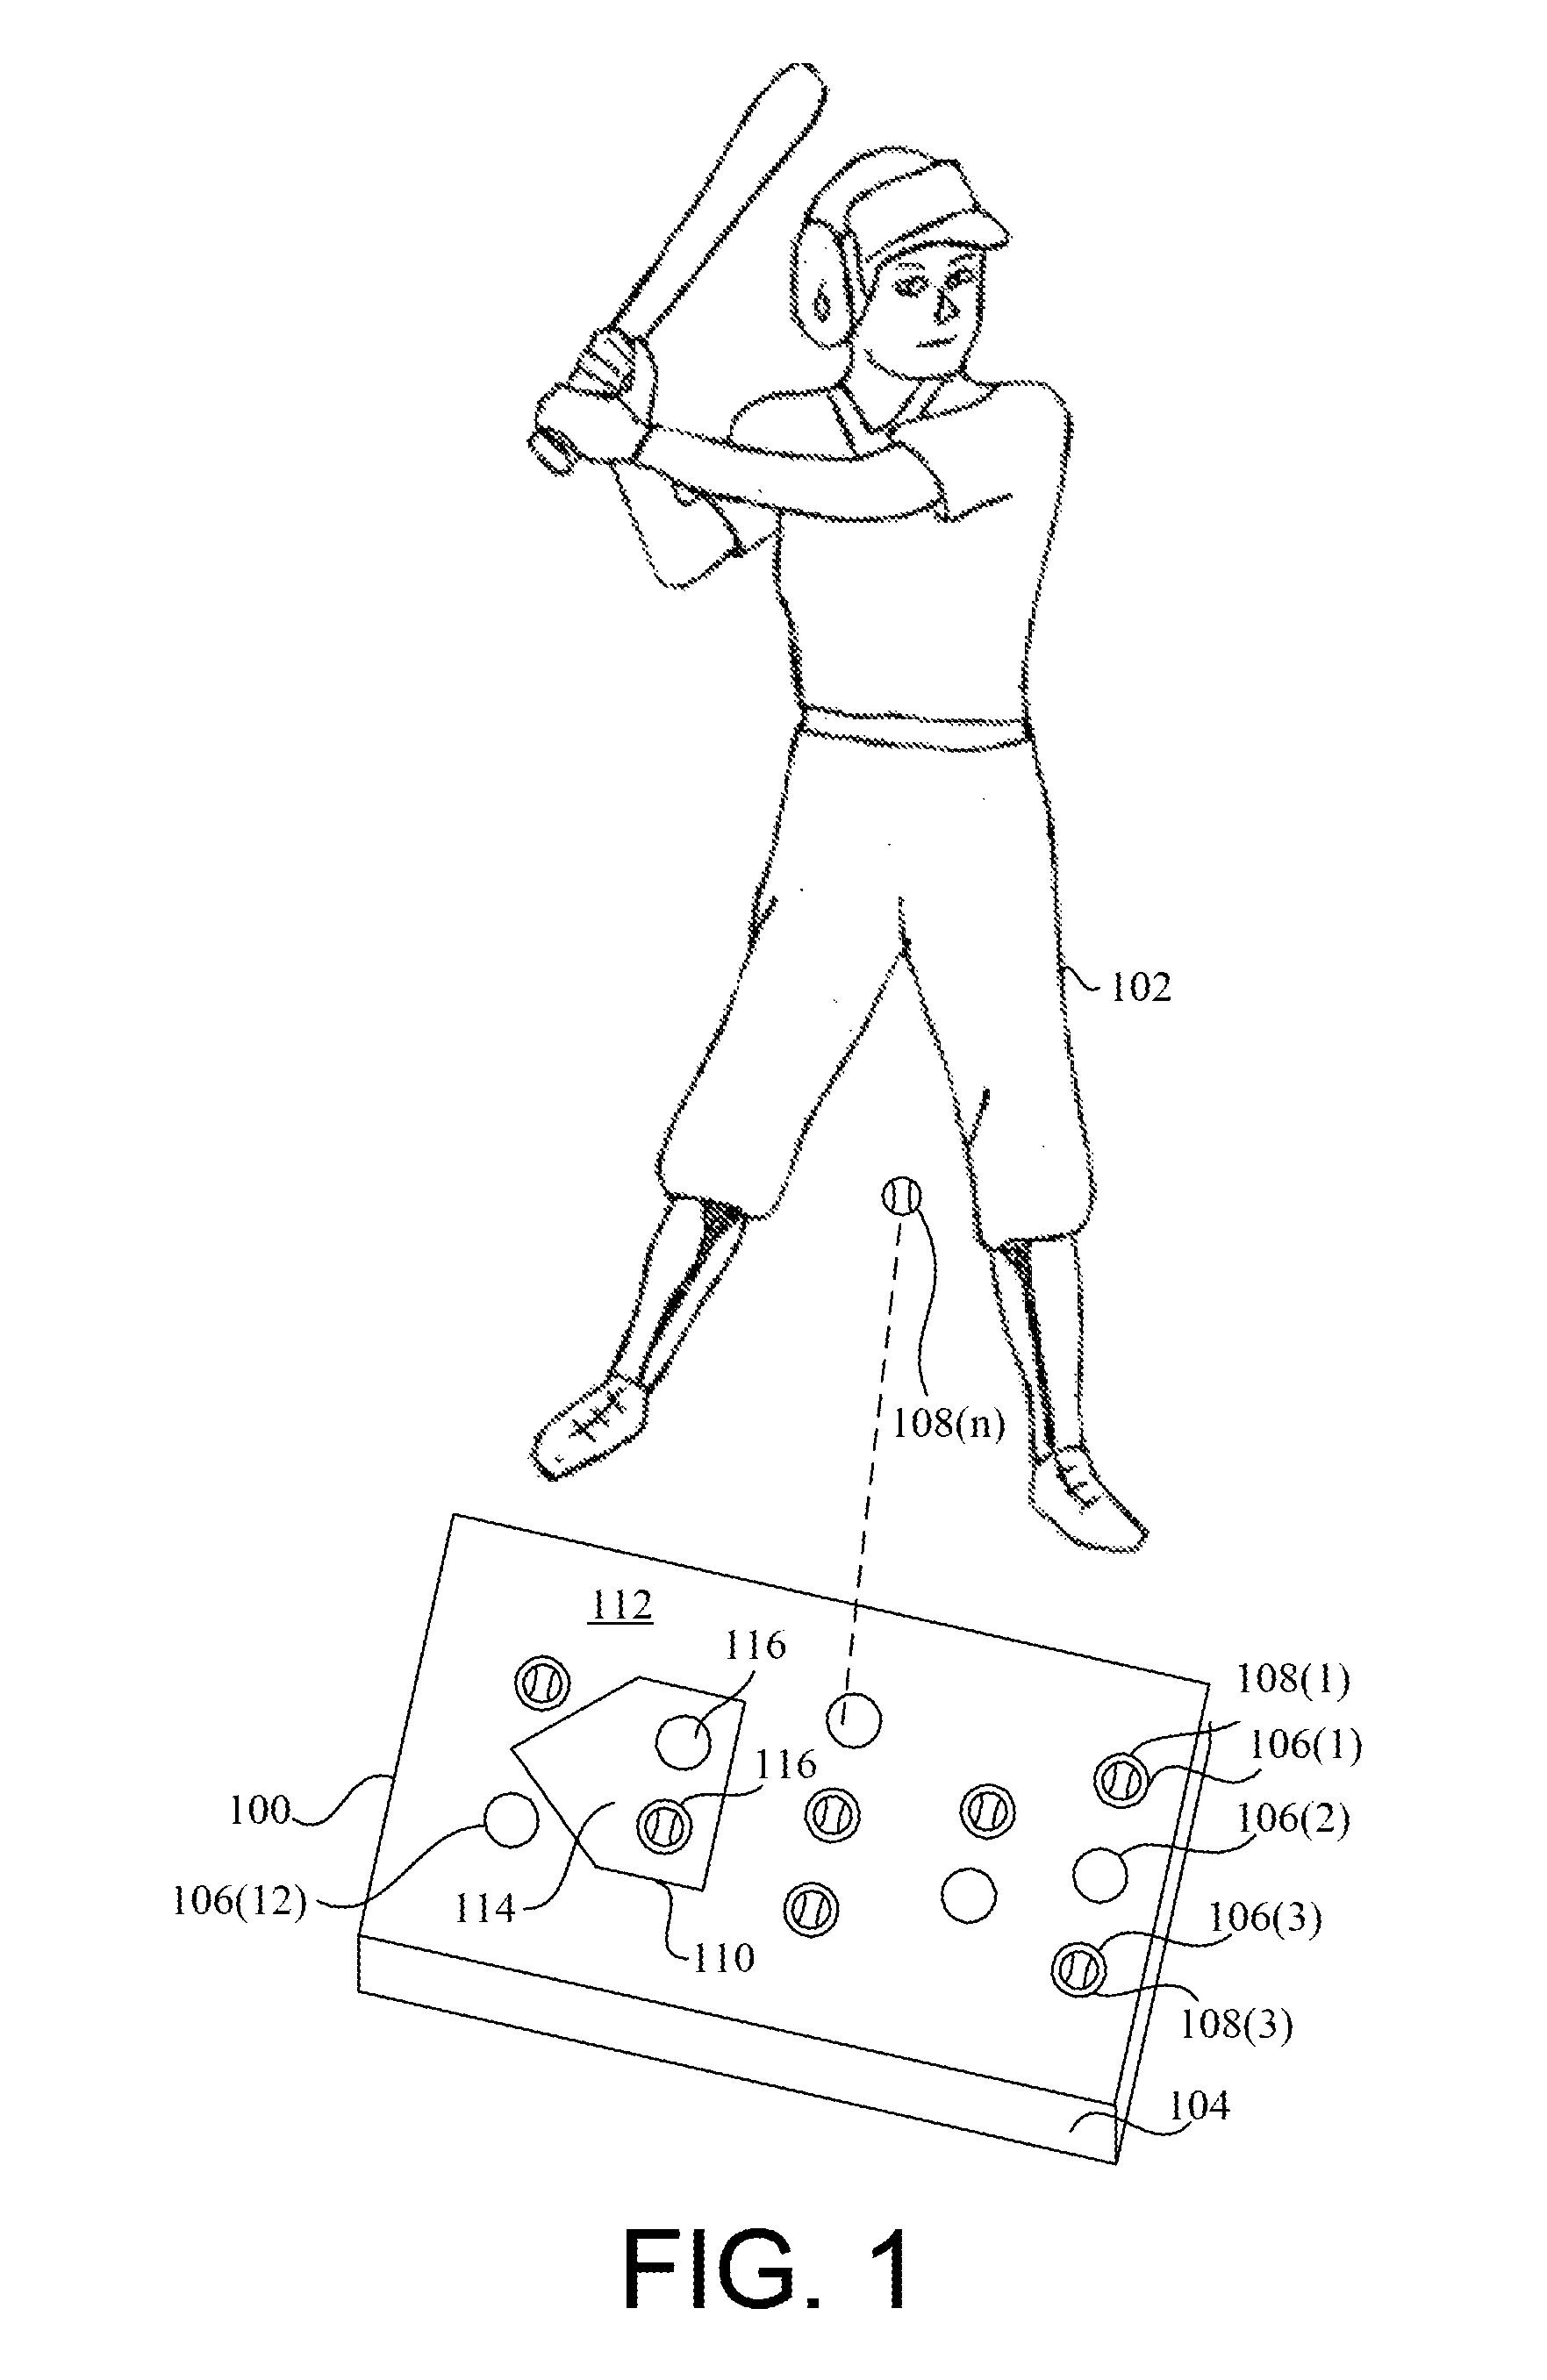 Ball tossing apparatus and method